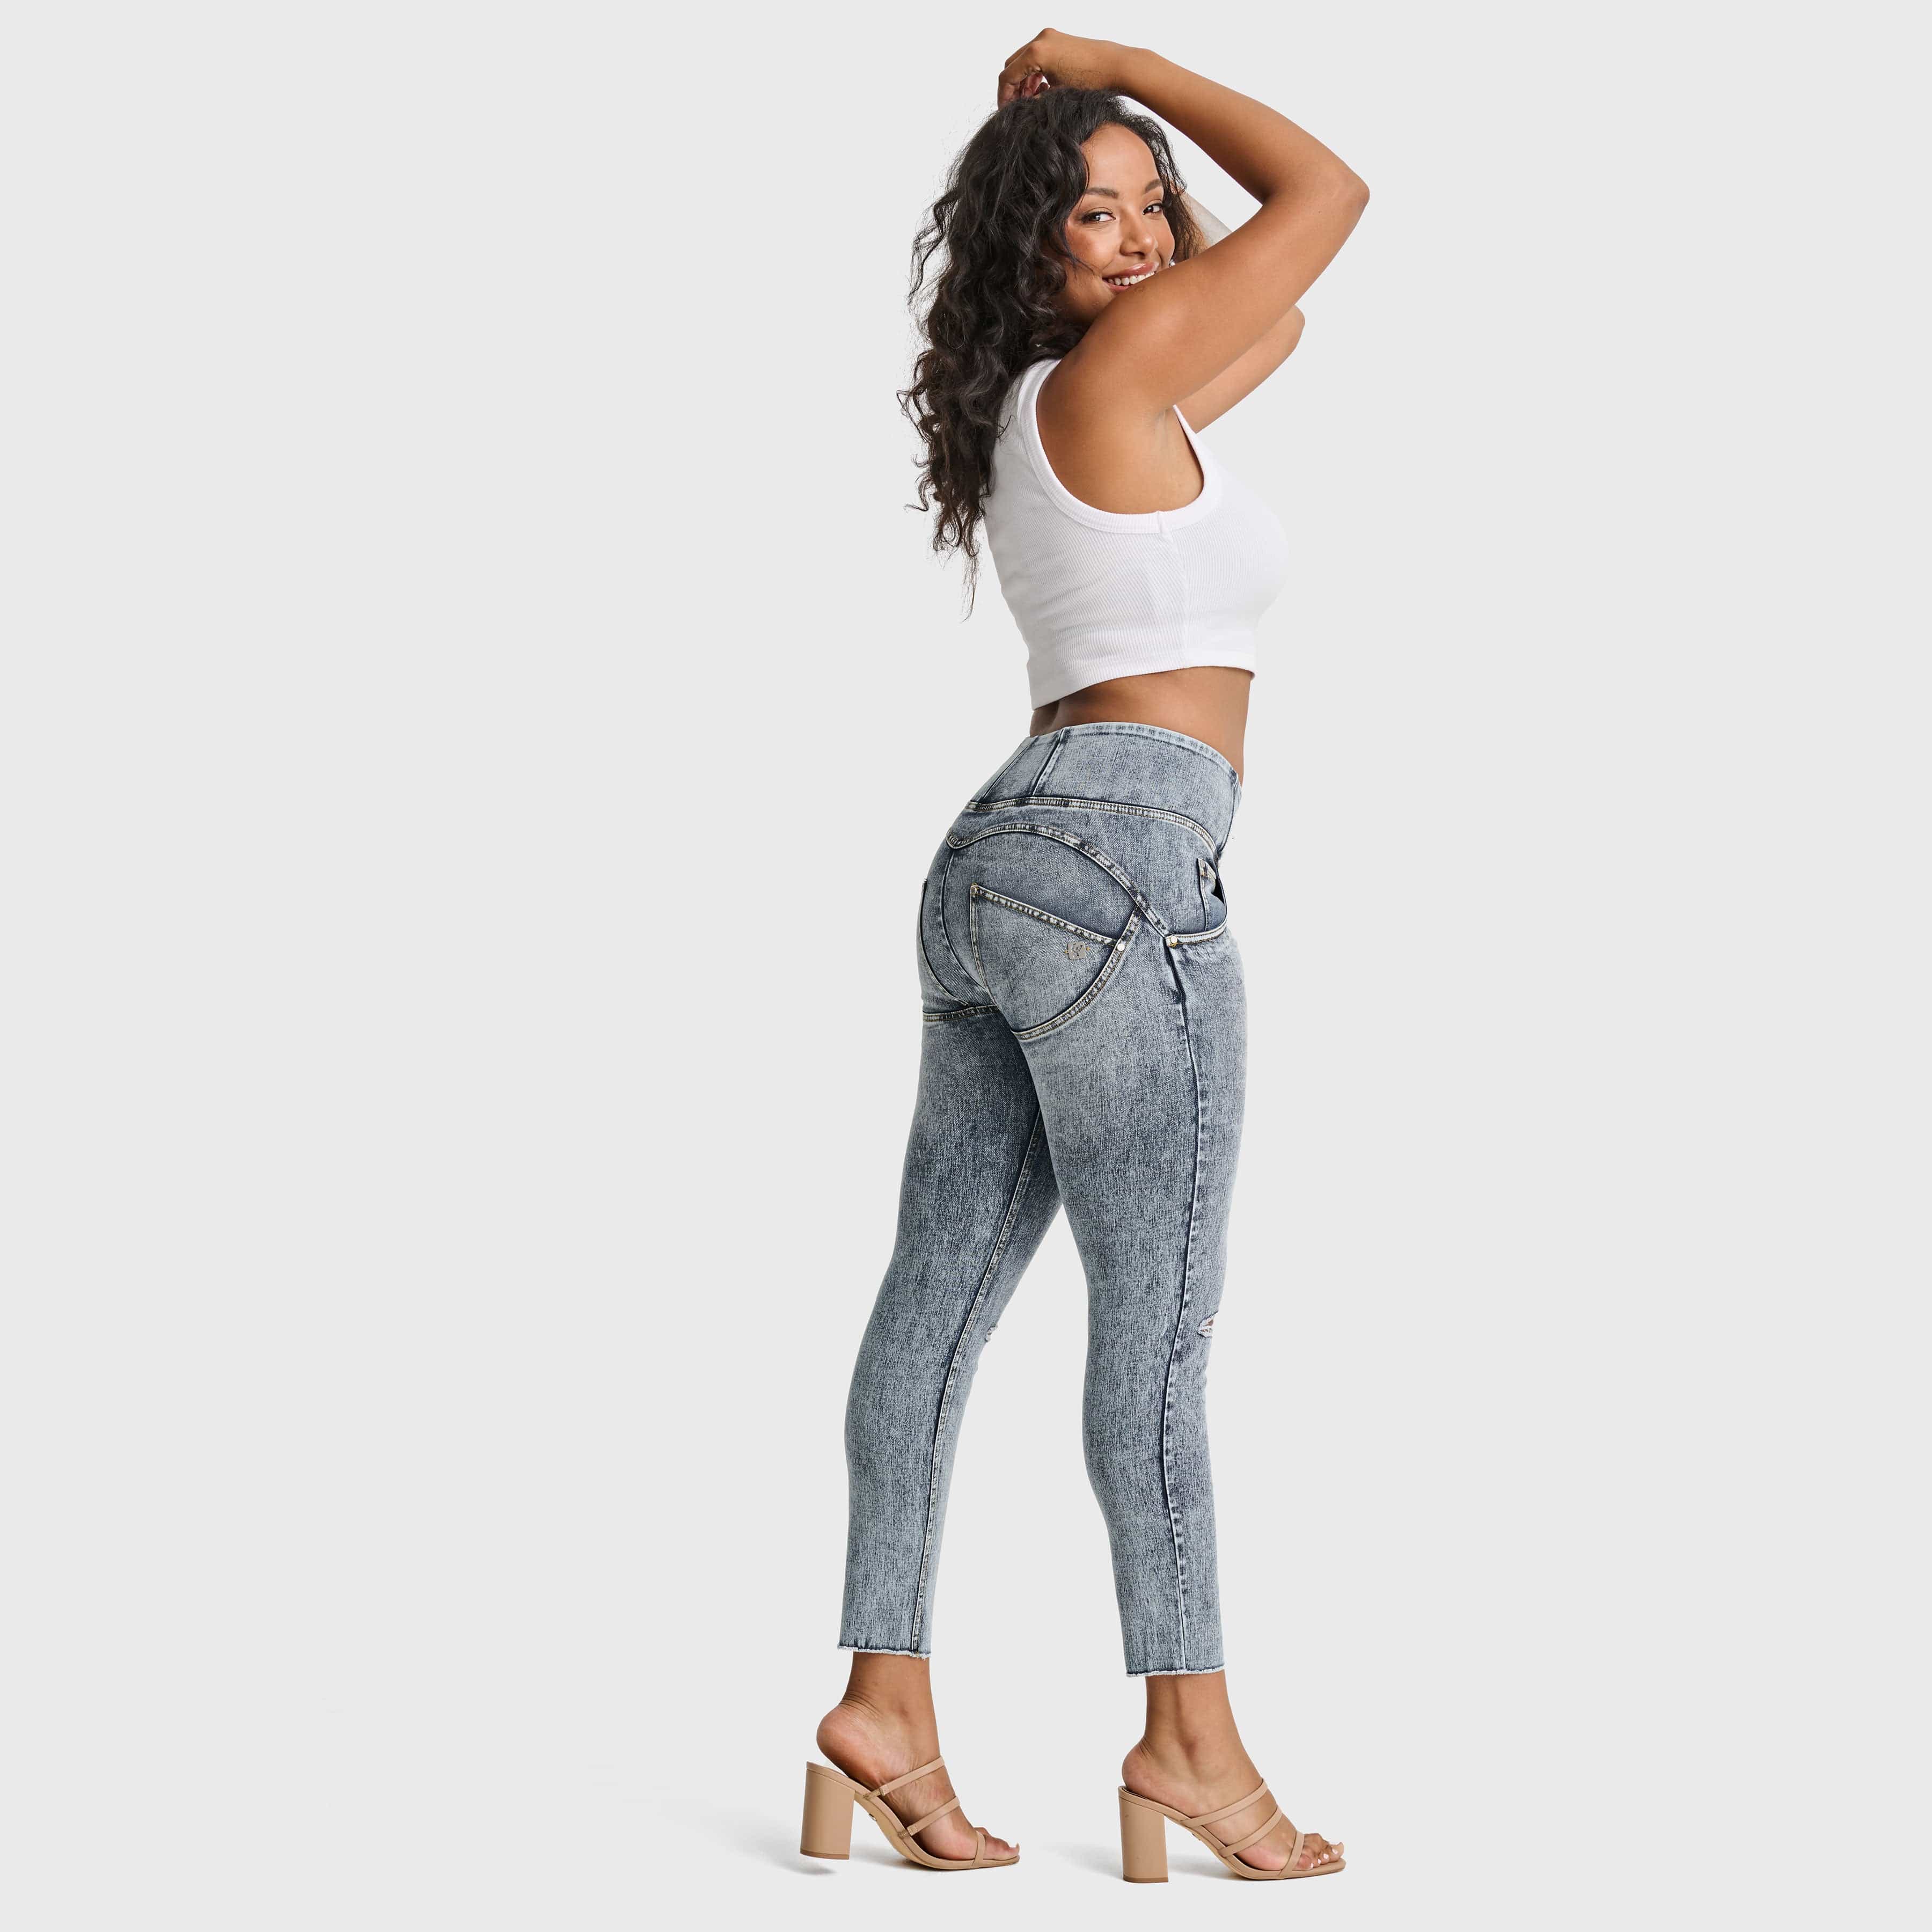 WR.UP® SNUG Ripped Jeans - High Waisted - Petite Length - Blue Stonewash + Yellow Stitching 3